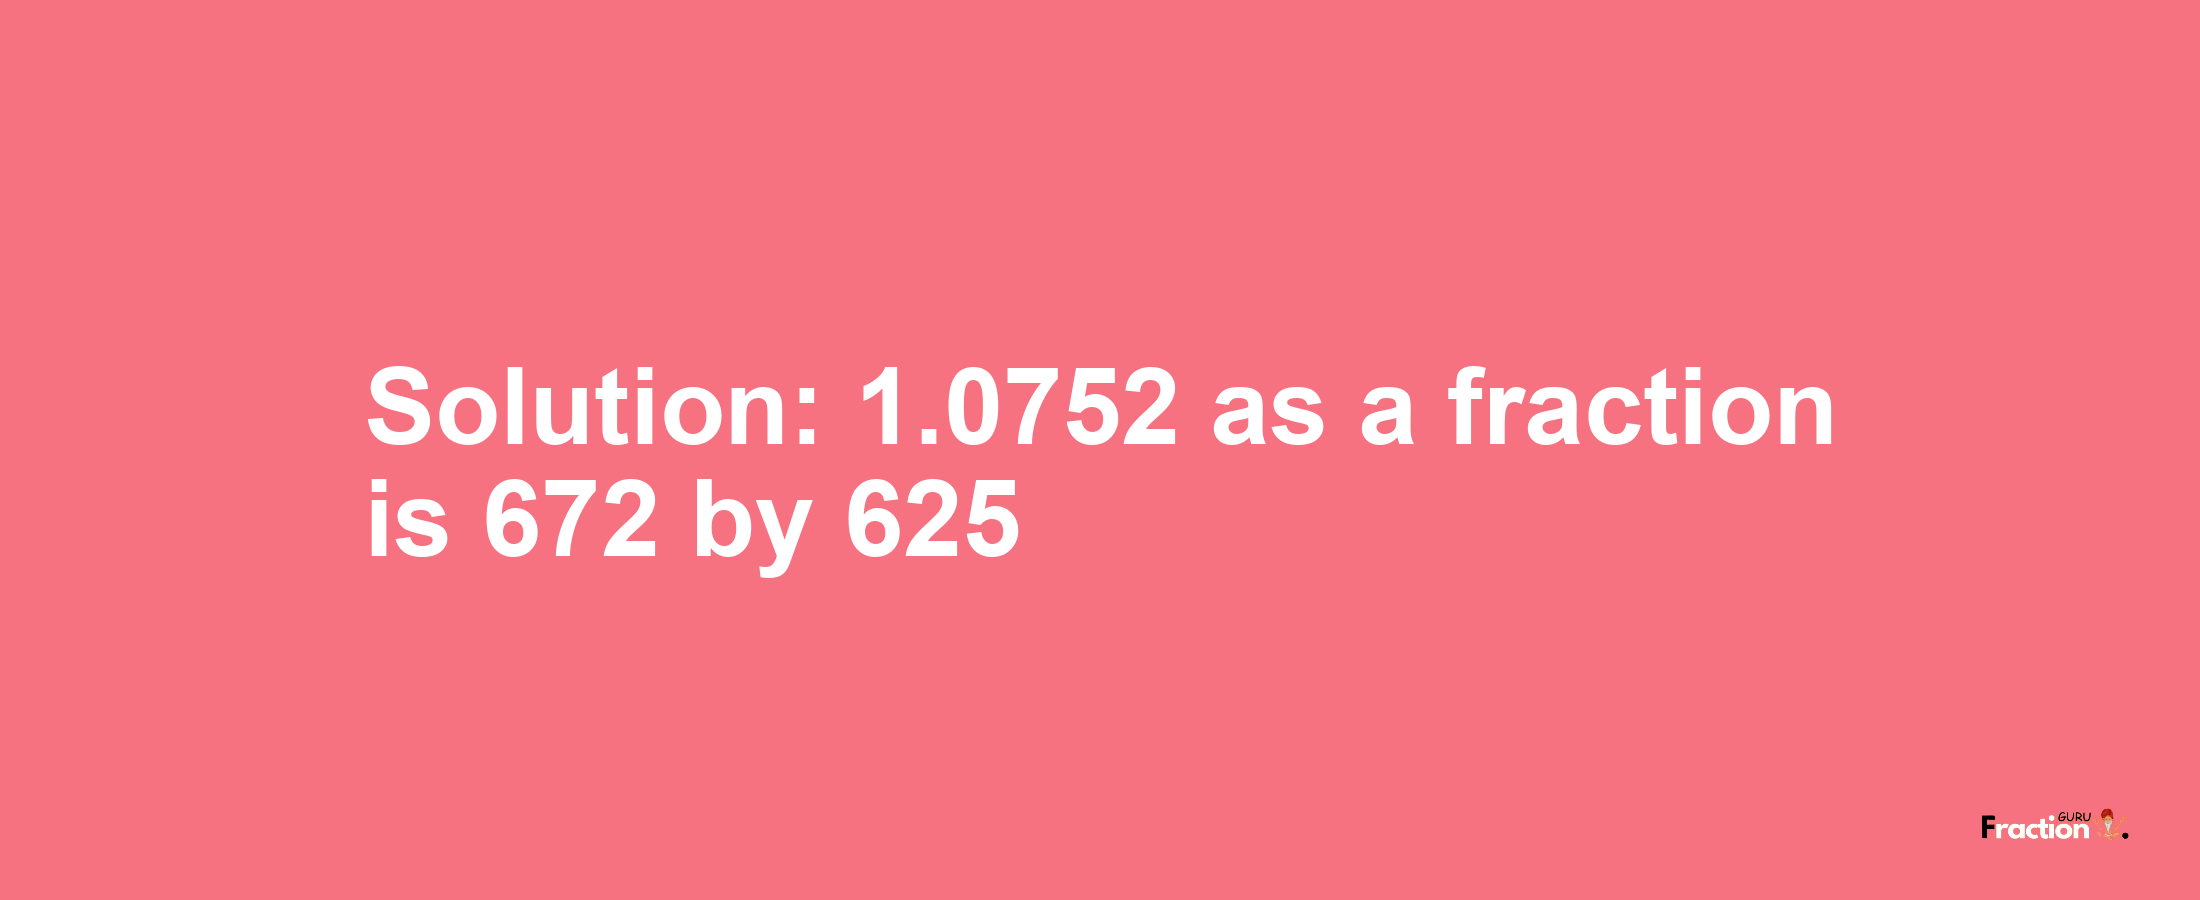 Solution:1.0752 as a fraction is 672/625